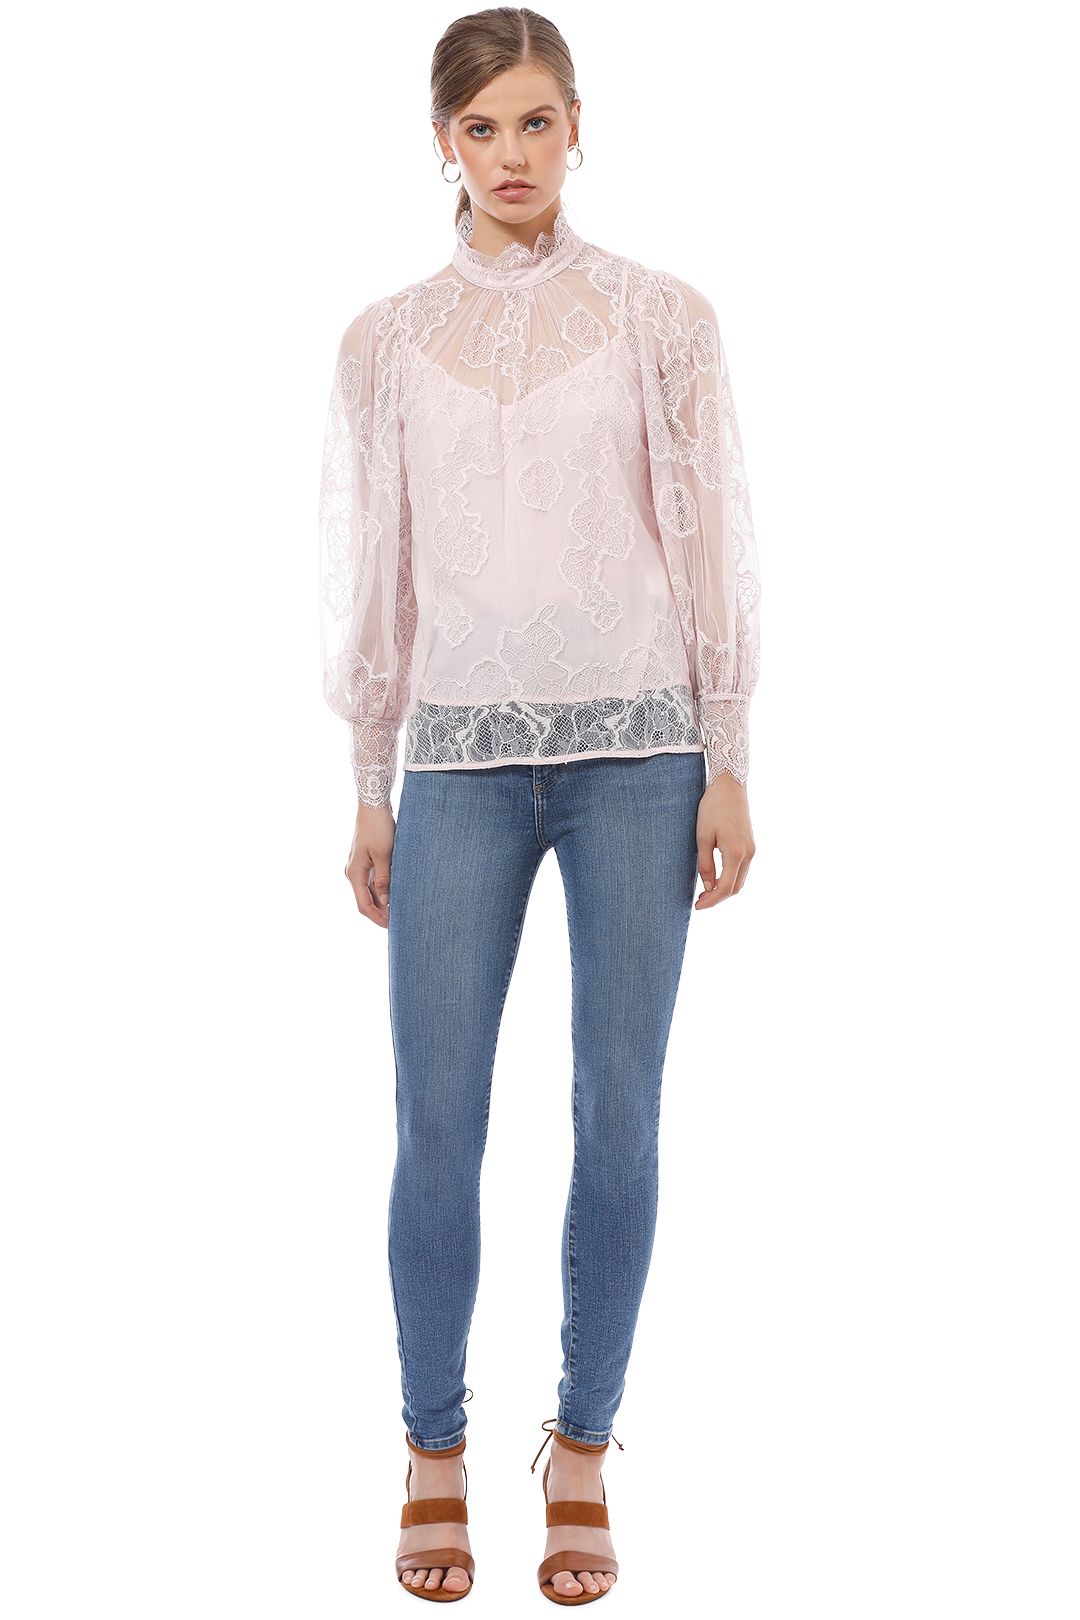 Witchery - Lace Balloon Sleeve Blouse - Pink - Front